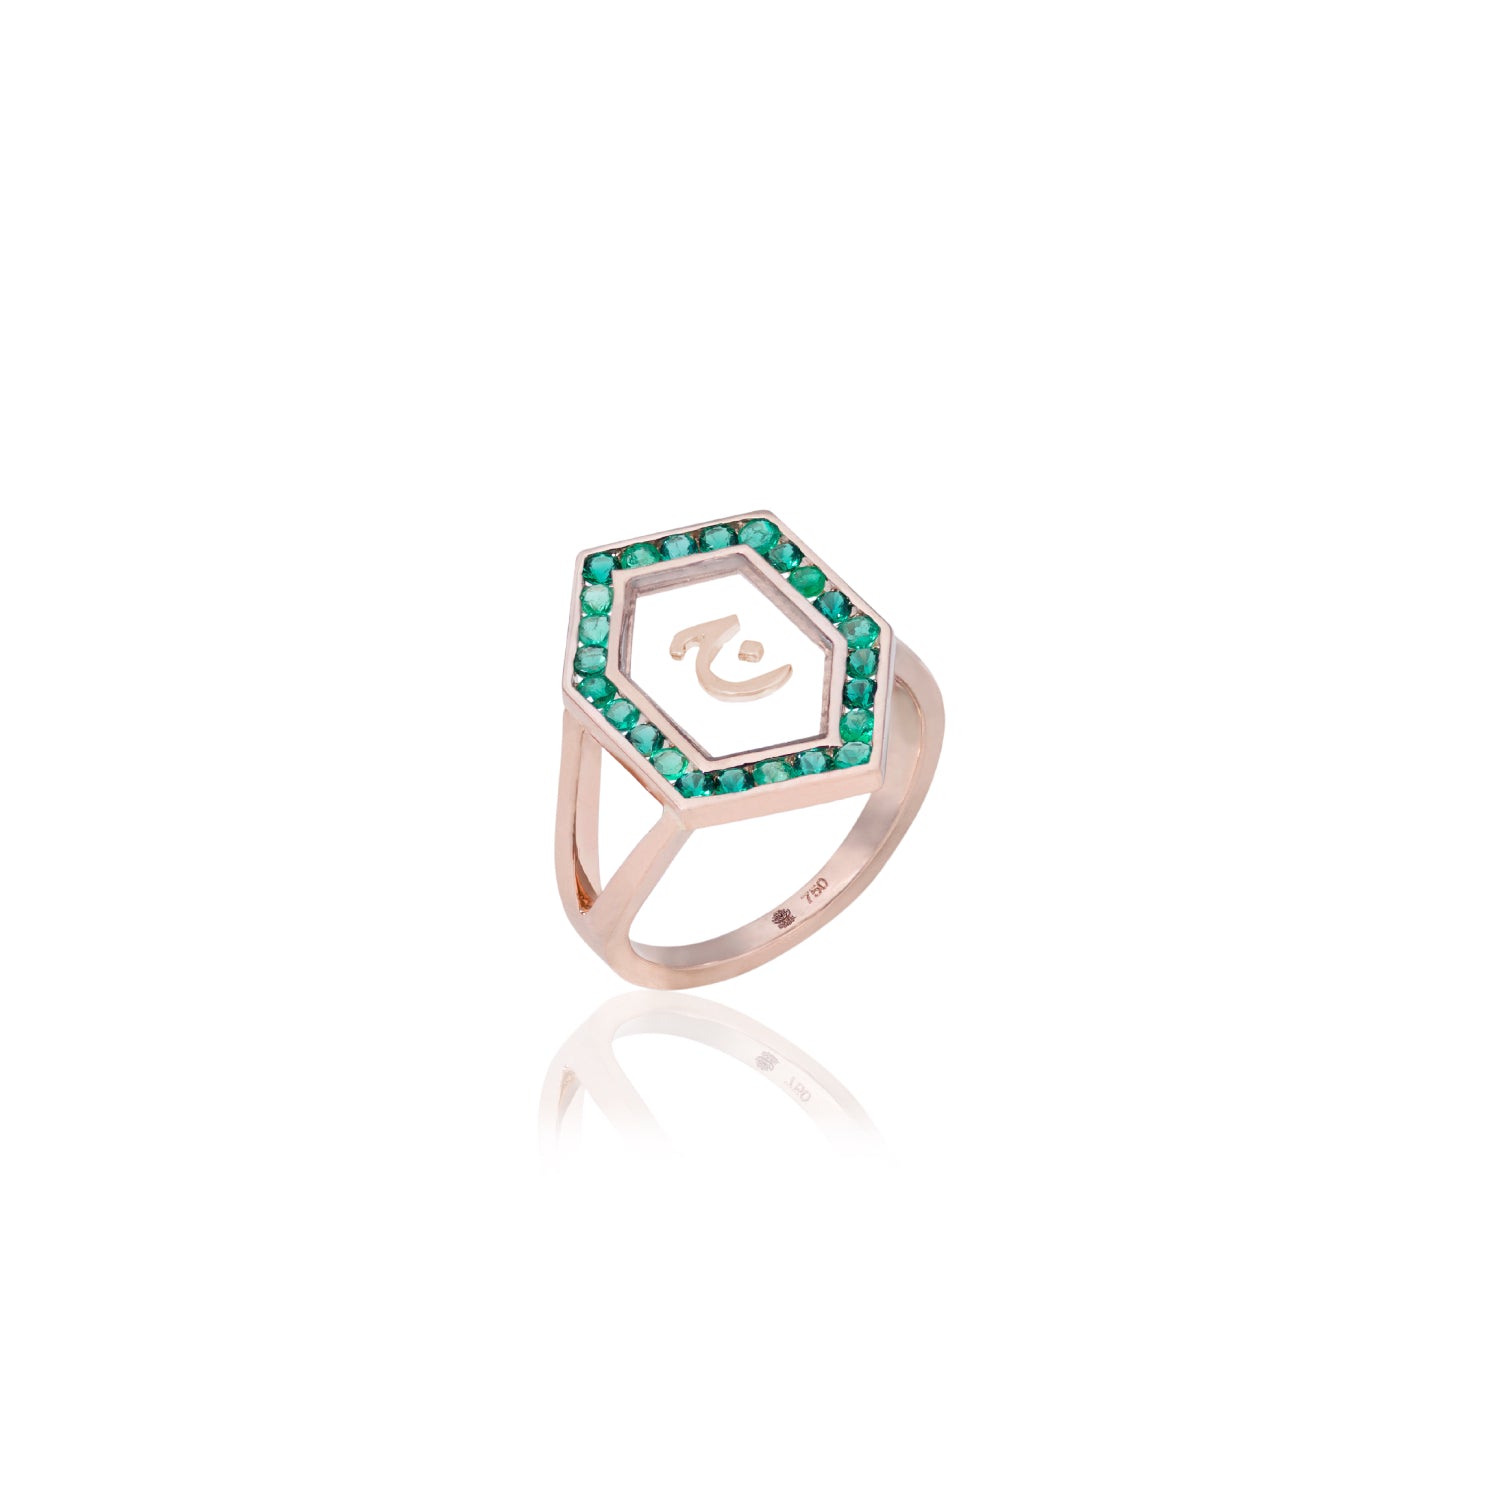 Qamoos 1.0 Letter ج Emerald Ring in Rose Gold